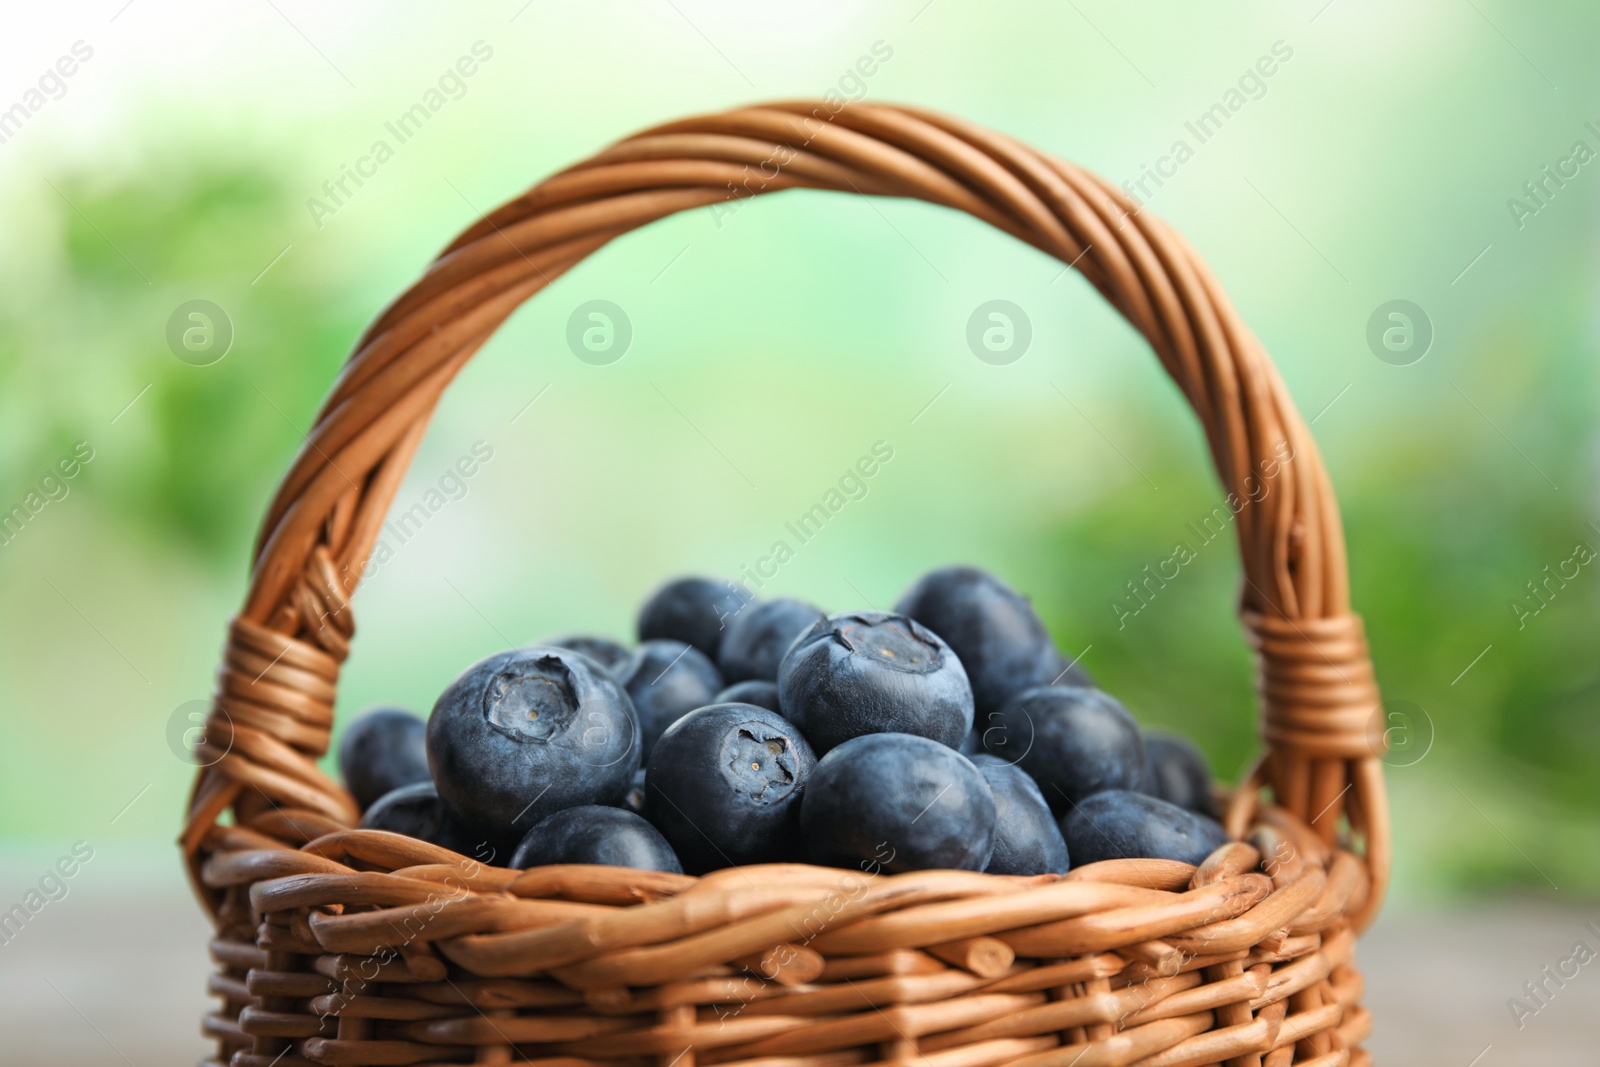 Photo of Wicker basket with fresh blueberries on blurred green background, closeup